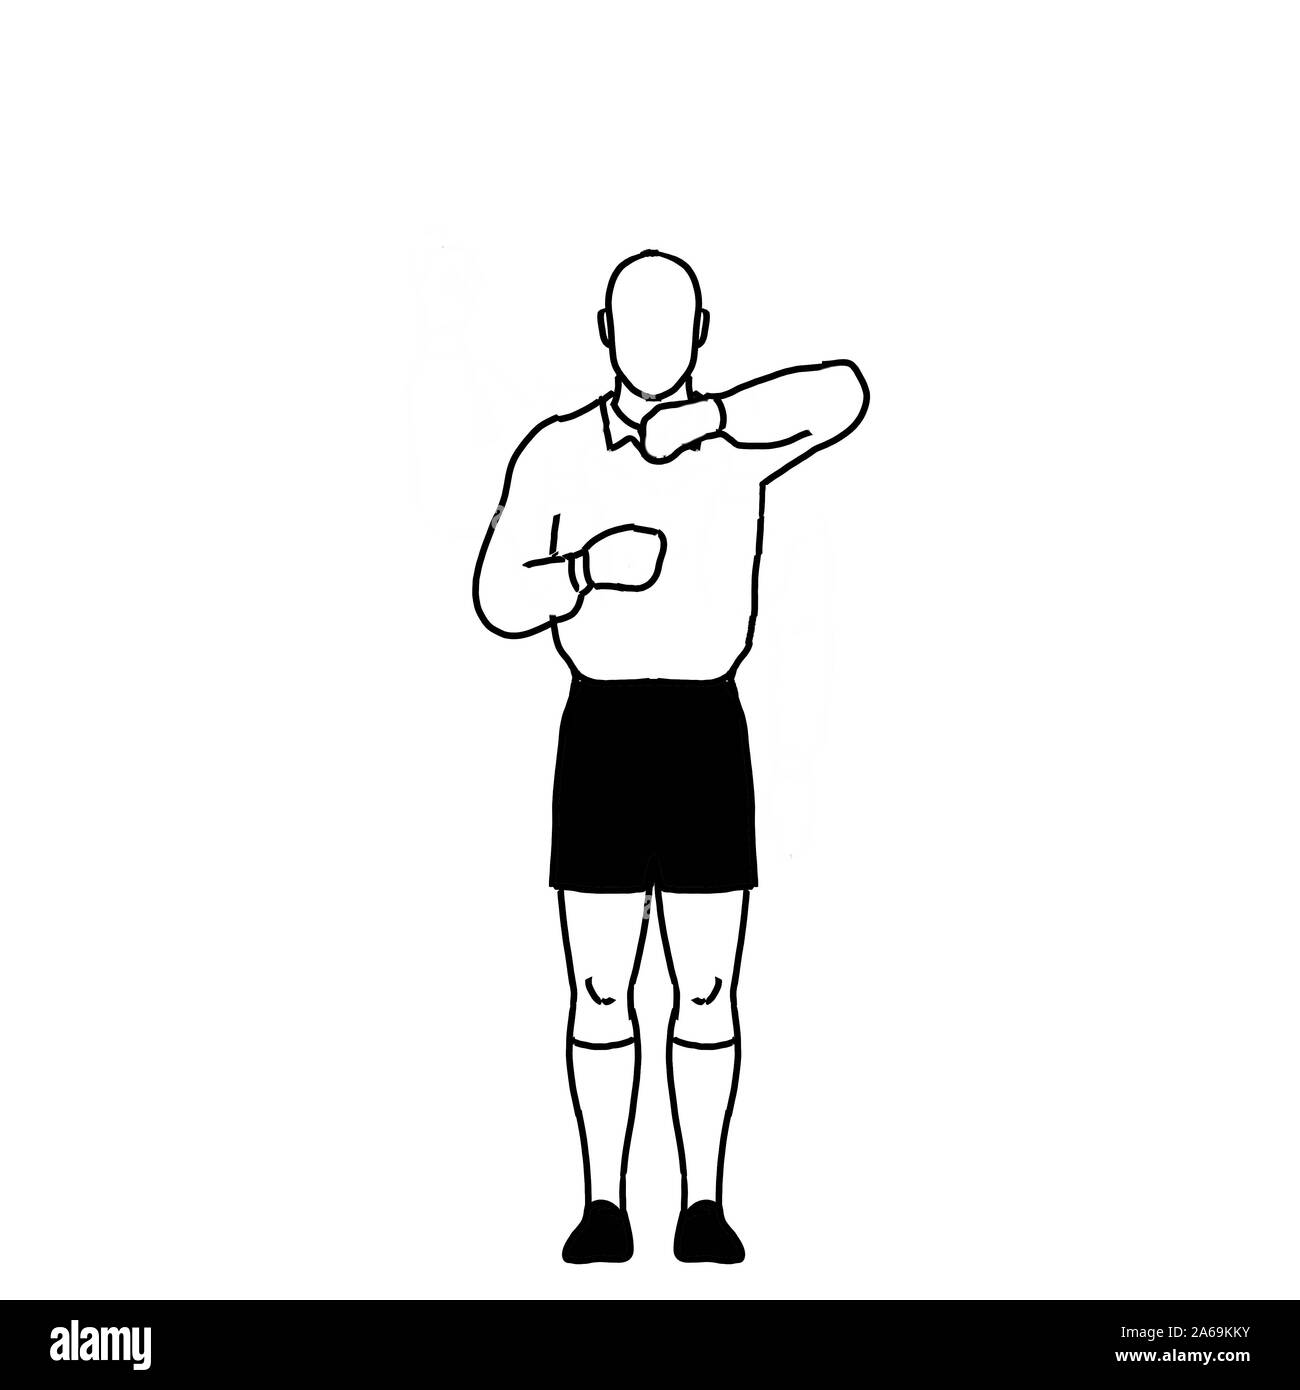 Retro style line drawing illustration showing a rugby referee with penalty leaning on lineout hand signal on isolated background in black and white. Stock Photo